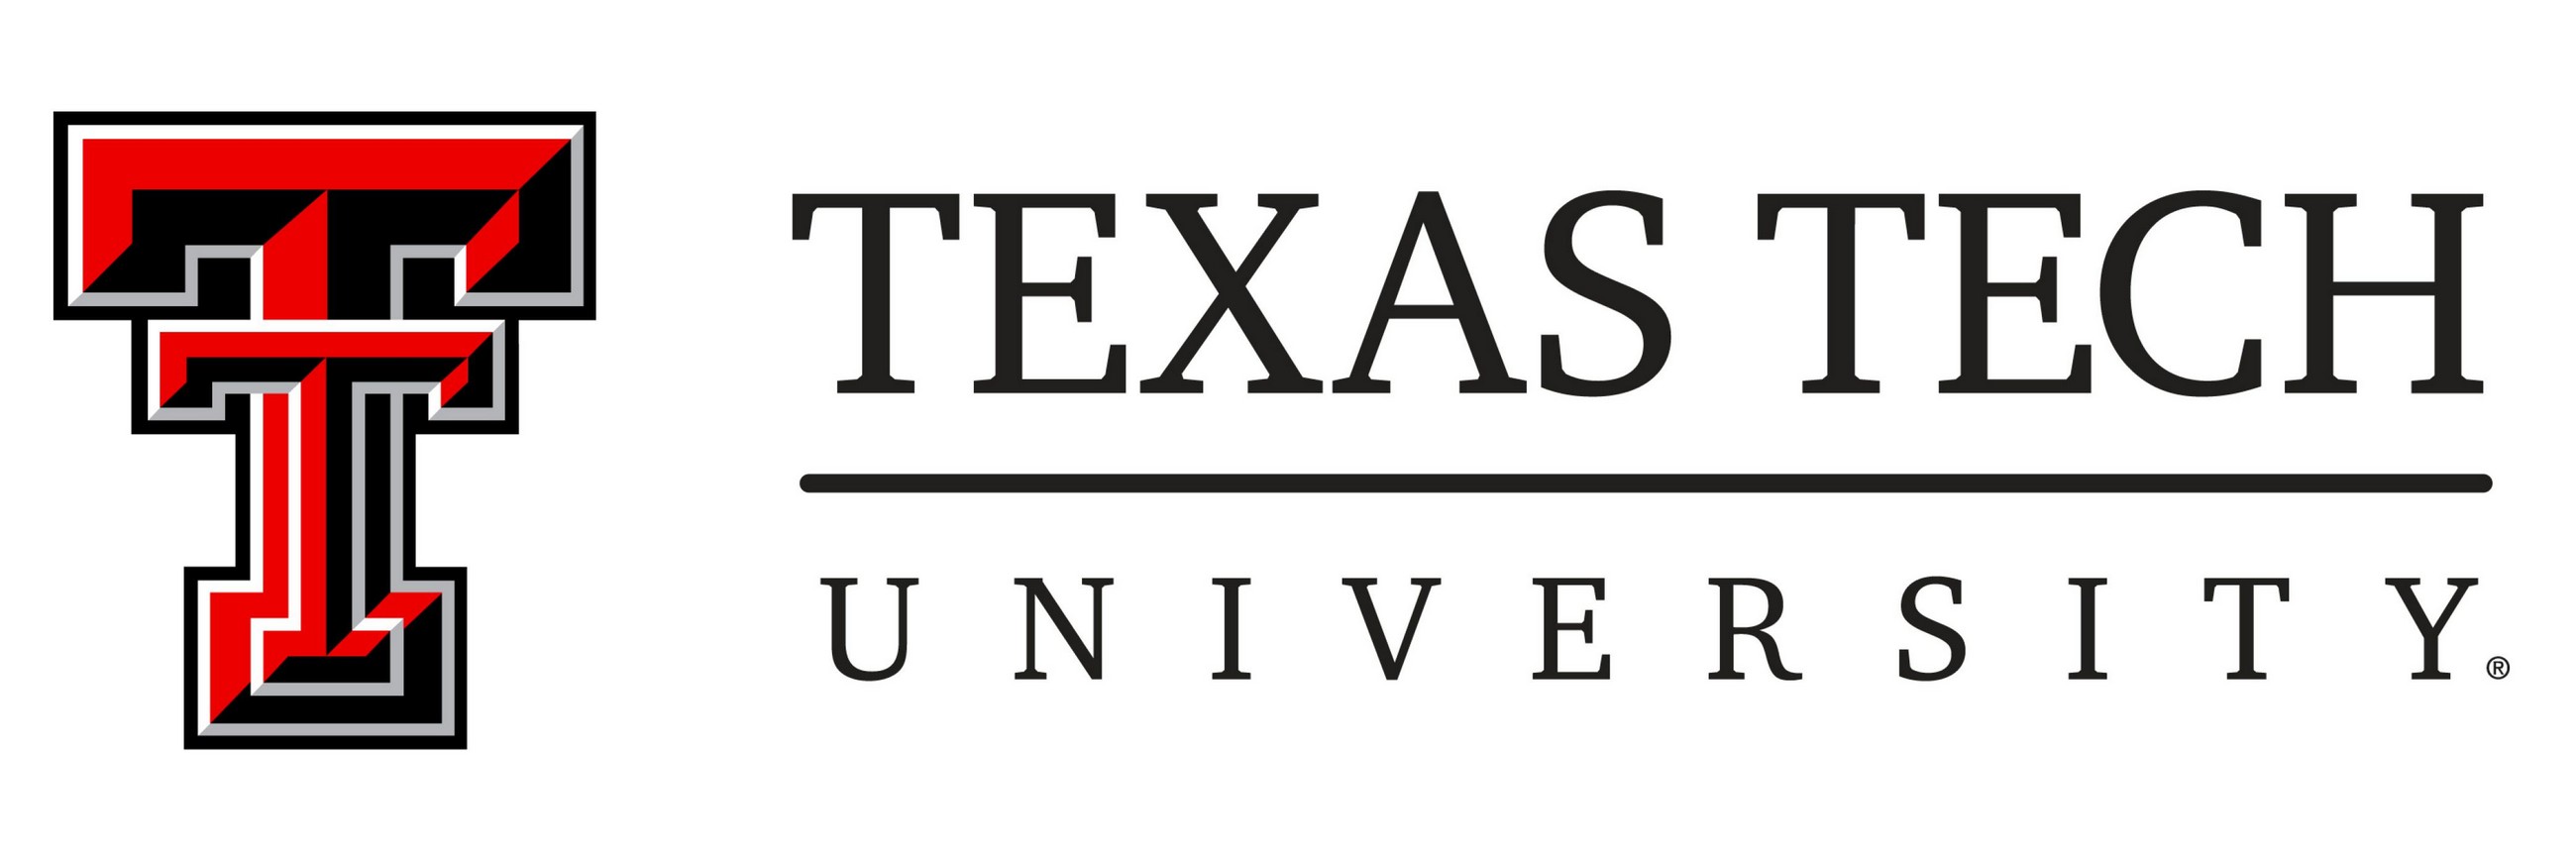 Texas Tech: Professor and Chair, Department of Natural Resources Management